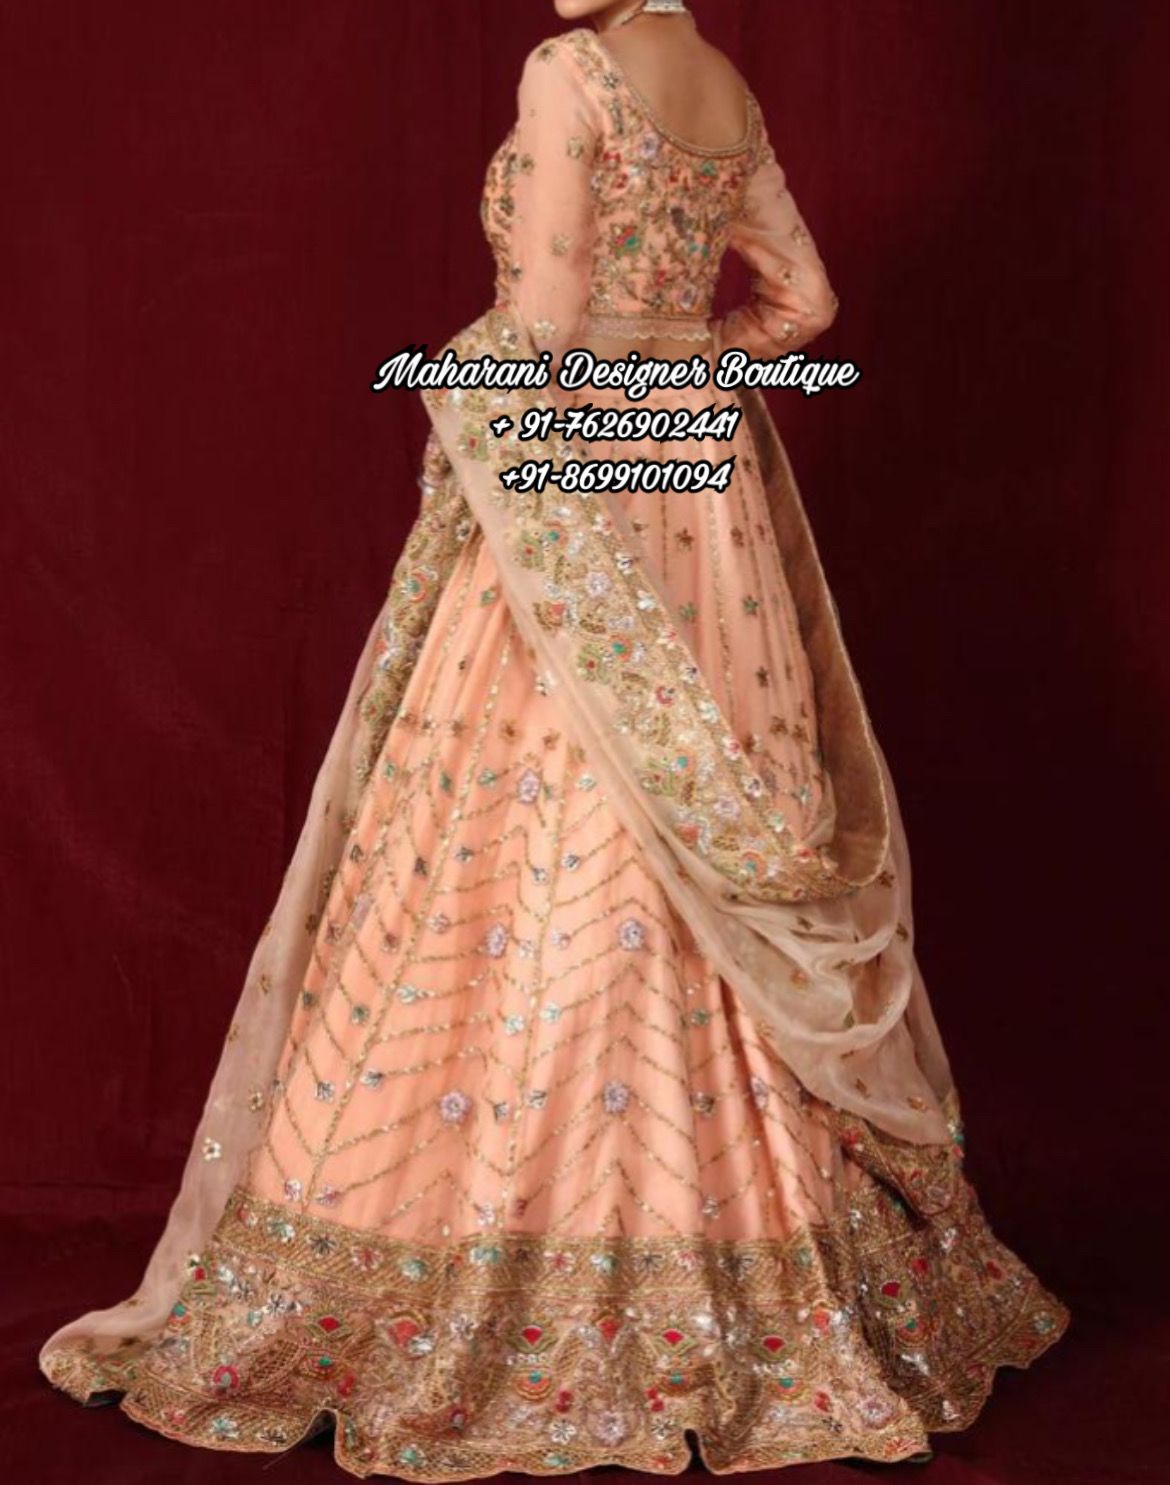 50+ Lehenga Blouse Designs To Browse & Take Inspiration From! | Latest bridal  blouse designs, Bridal blouse designs, Indian bridal outfits